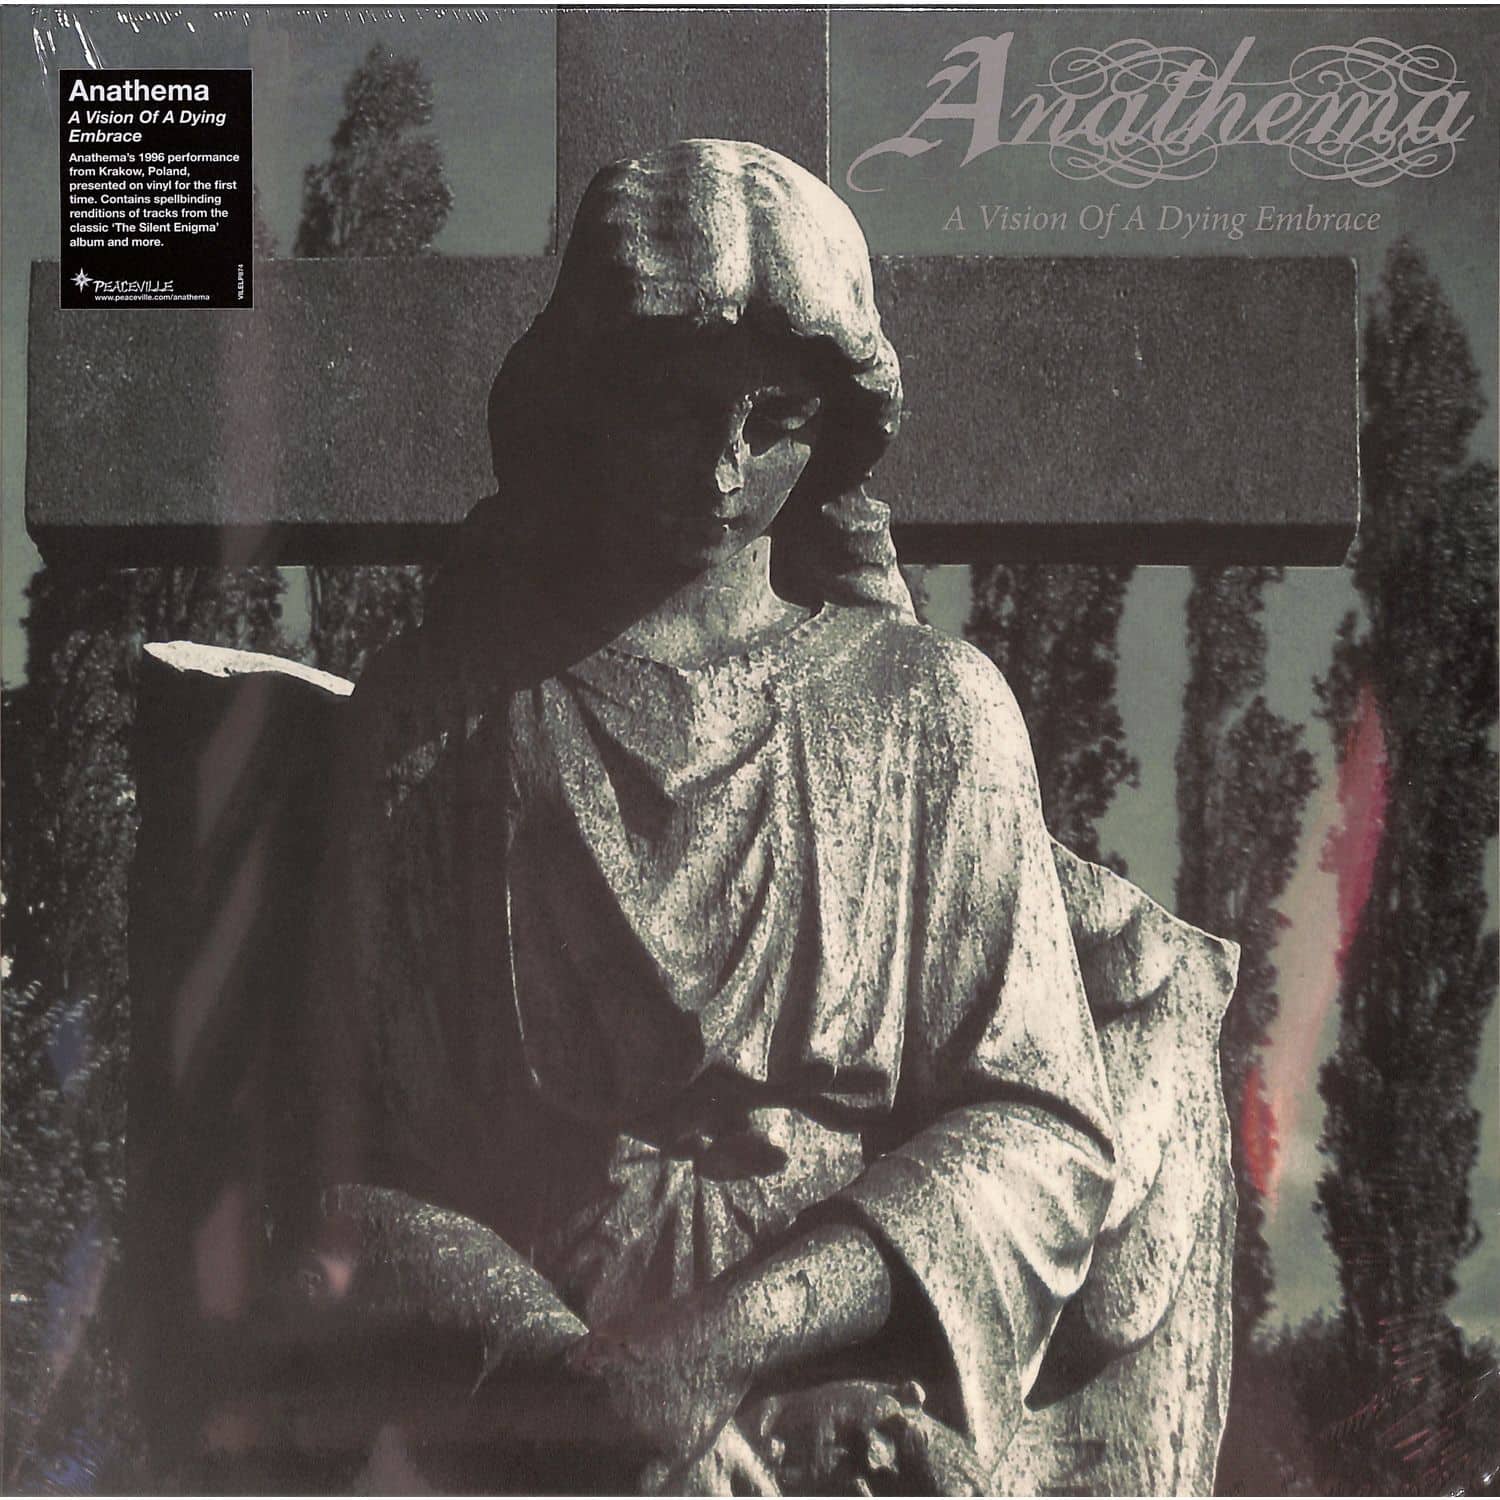 Anathema - A VISION OF A DYING EMBRACE 